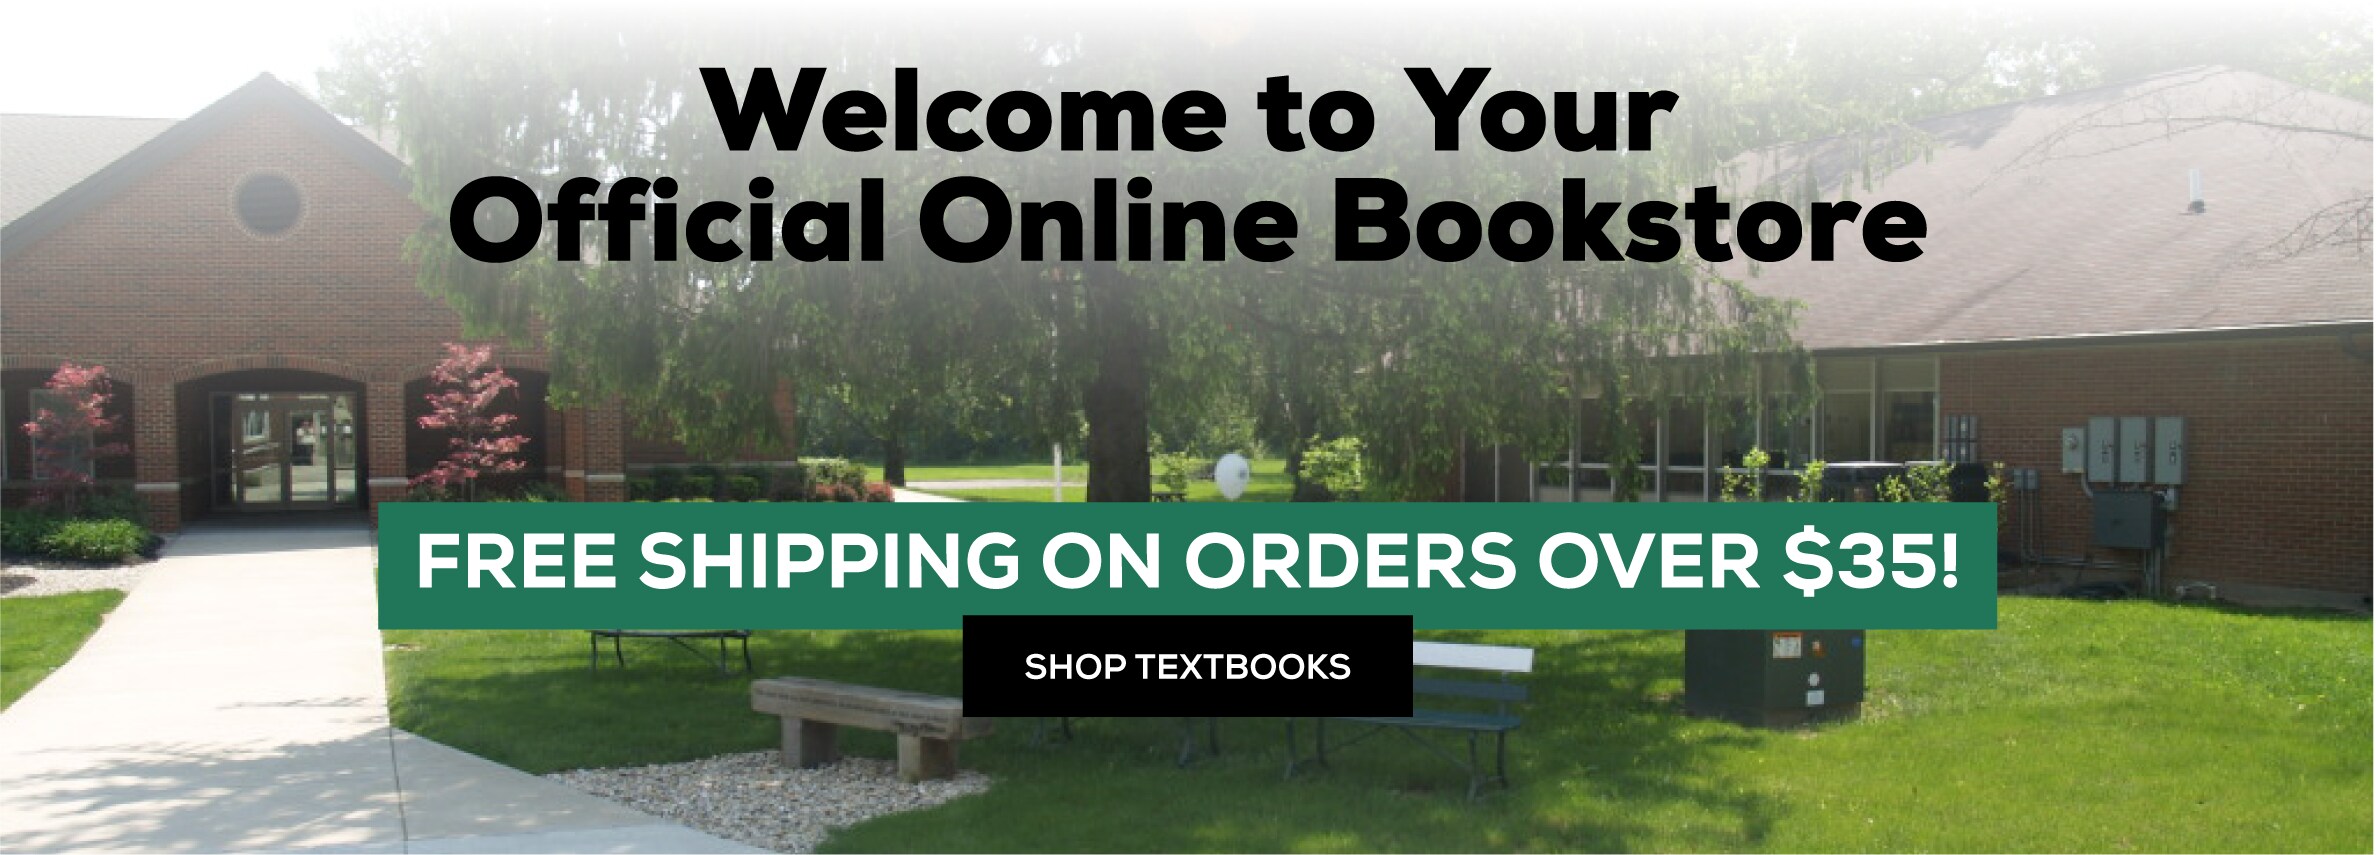 Welcome to your official Online Bookstore. Free shipping on all orders over $35! Shop Textbooks